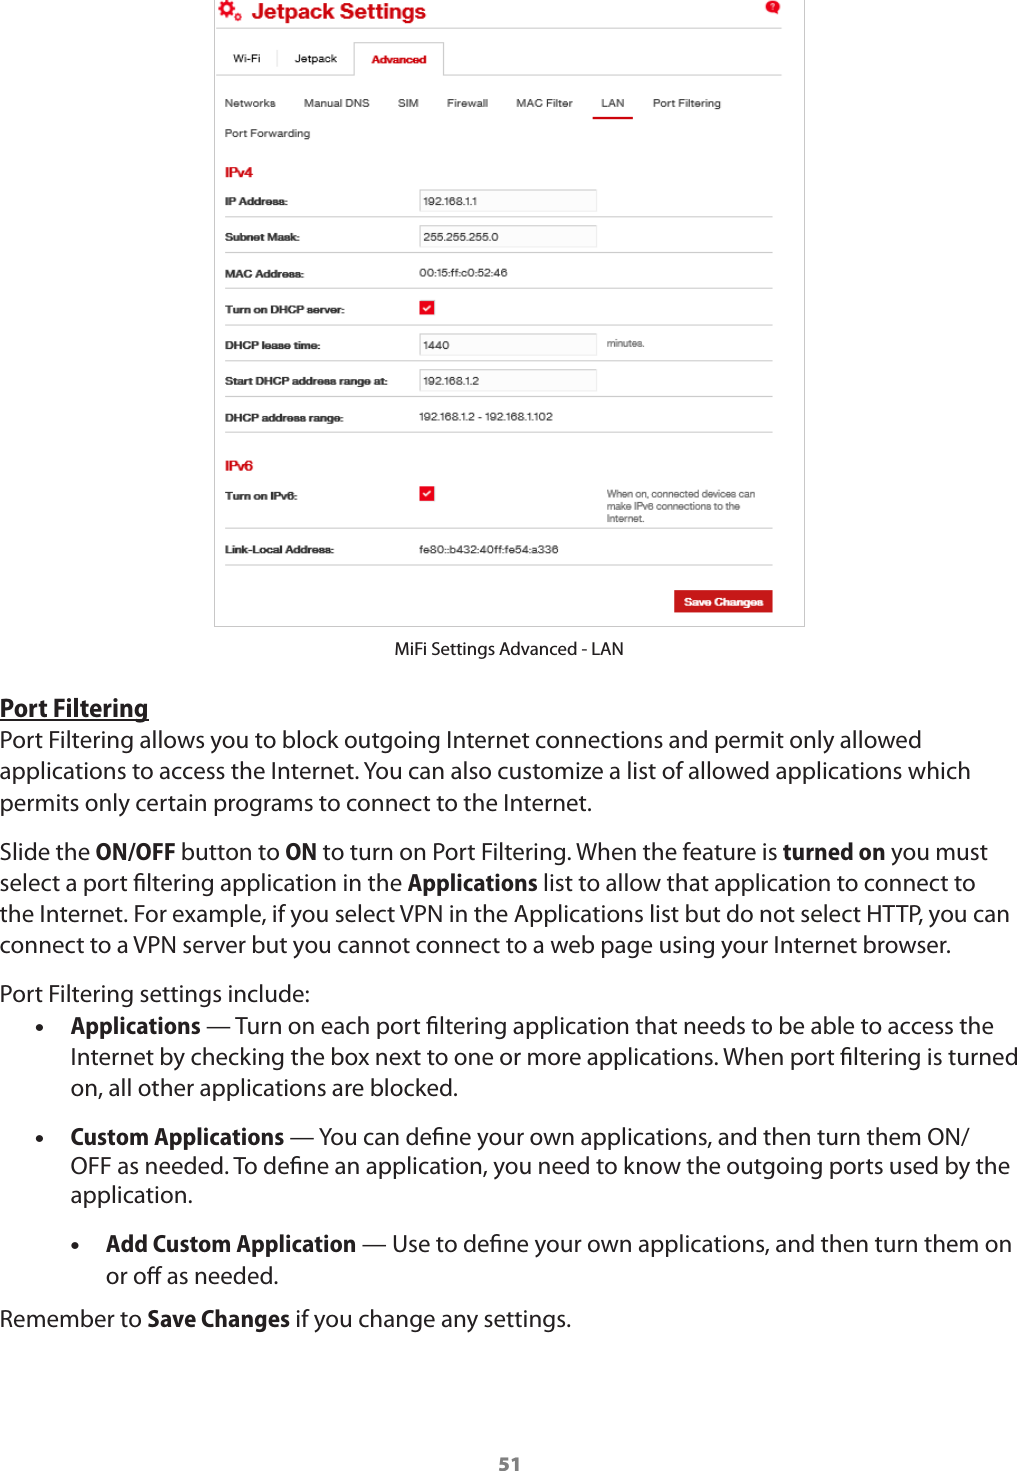 51MiFi Settings Advanced - LANPort FilteringPort Filtering allows you to block outgoing Internet connections and permit only allowed applications to access the Internet. You can also customize a list of allowed applications which permits only certain programs to connect to the Internet. Slide the ON/OFF button to ON to turn on Port Filtering. When the feature is turned on you must select a port ltering application in the Applications list to allow that application to connect to the Internet. For example, if you select VPN in the Applications list but do not select HTTP, you can connect to a VPN server but you cannot connect to a web page using your Internet browser. Port Filtering settings include: •Applications — Turn on each port ltering application that needs to be able to access the Internet by checking the box next to one or more applications. When port ltering is turned on, all other applications are blocked. •Custom Applications — You can dene your own applications, and then turn them ON/OFF as needed. To dene an application, you need to know the outgoing ports used by the application.  •Add Custom Application — Use to dene your own applications, and then turn them on or o as needed.Remember to Save Changes if you change any settings. 